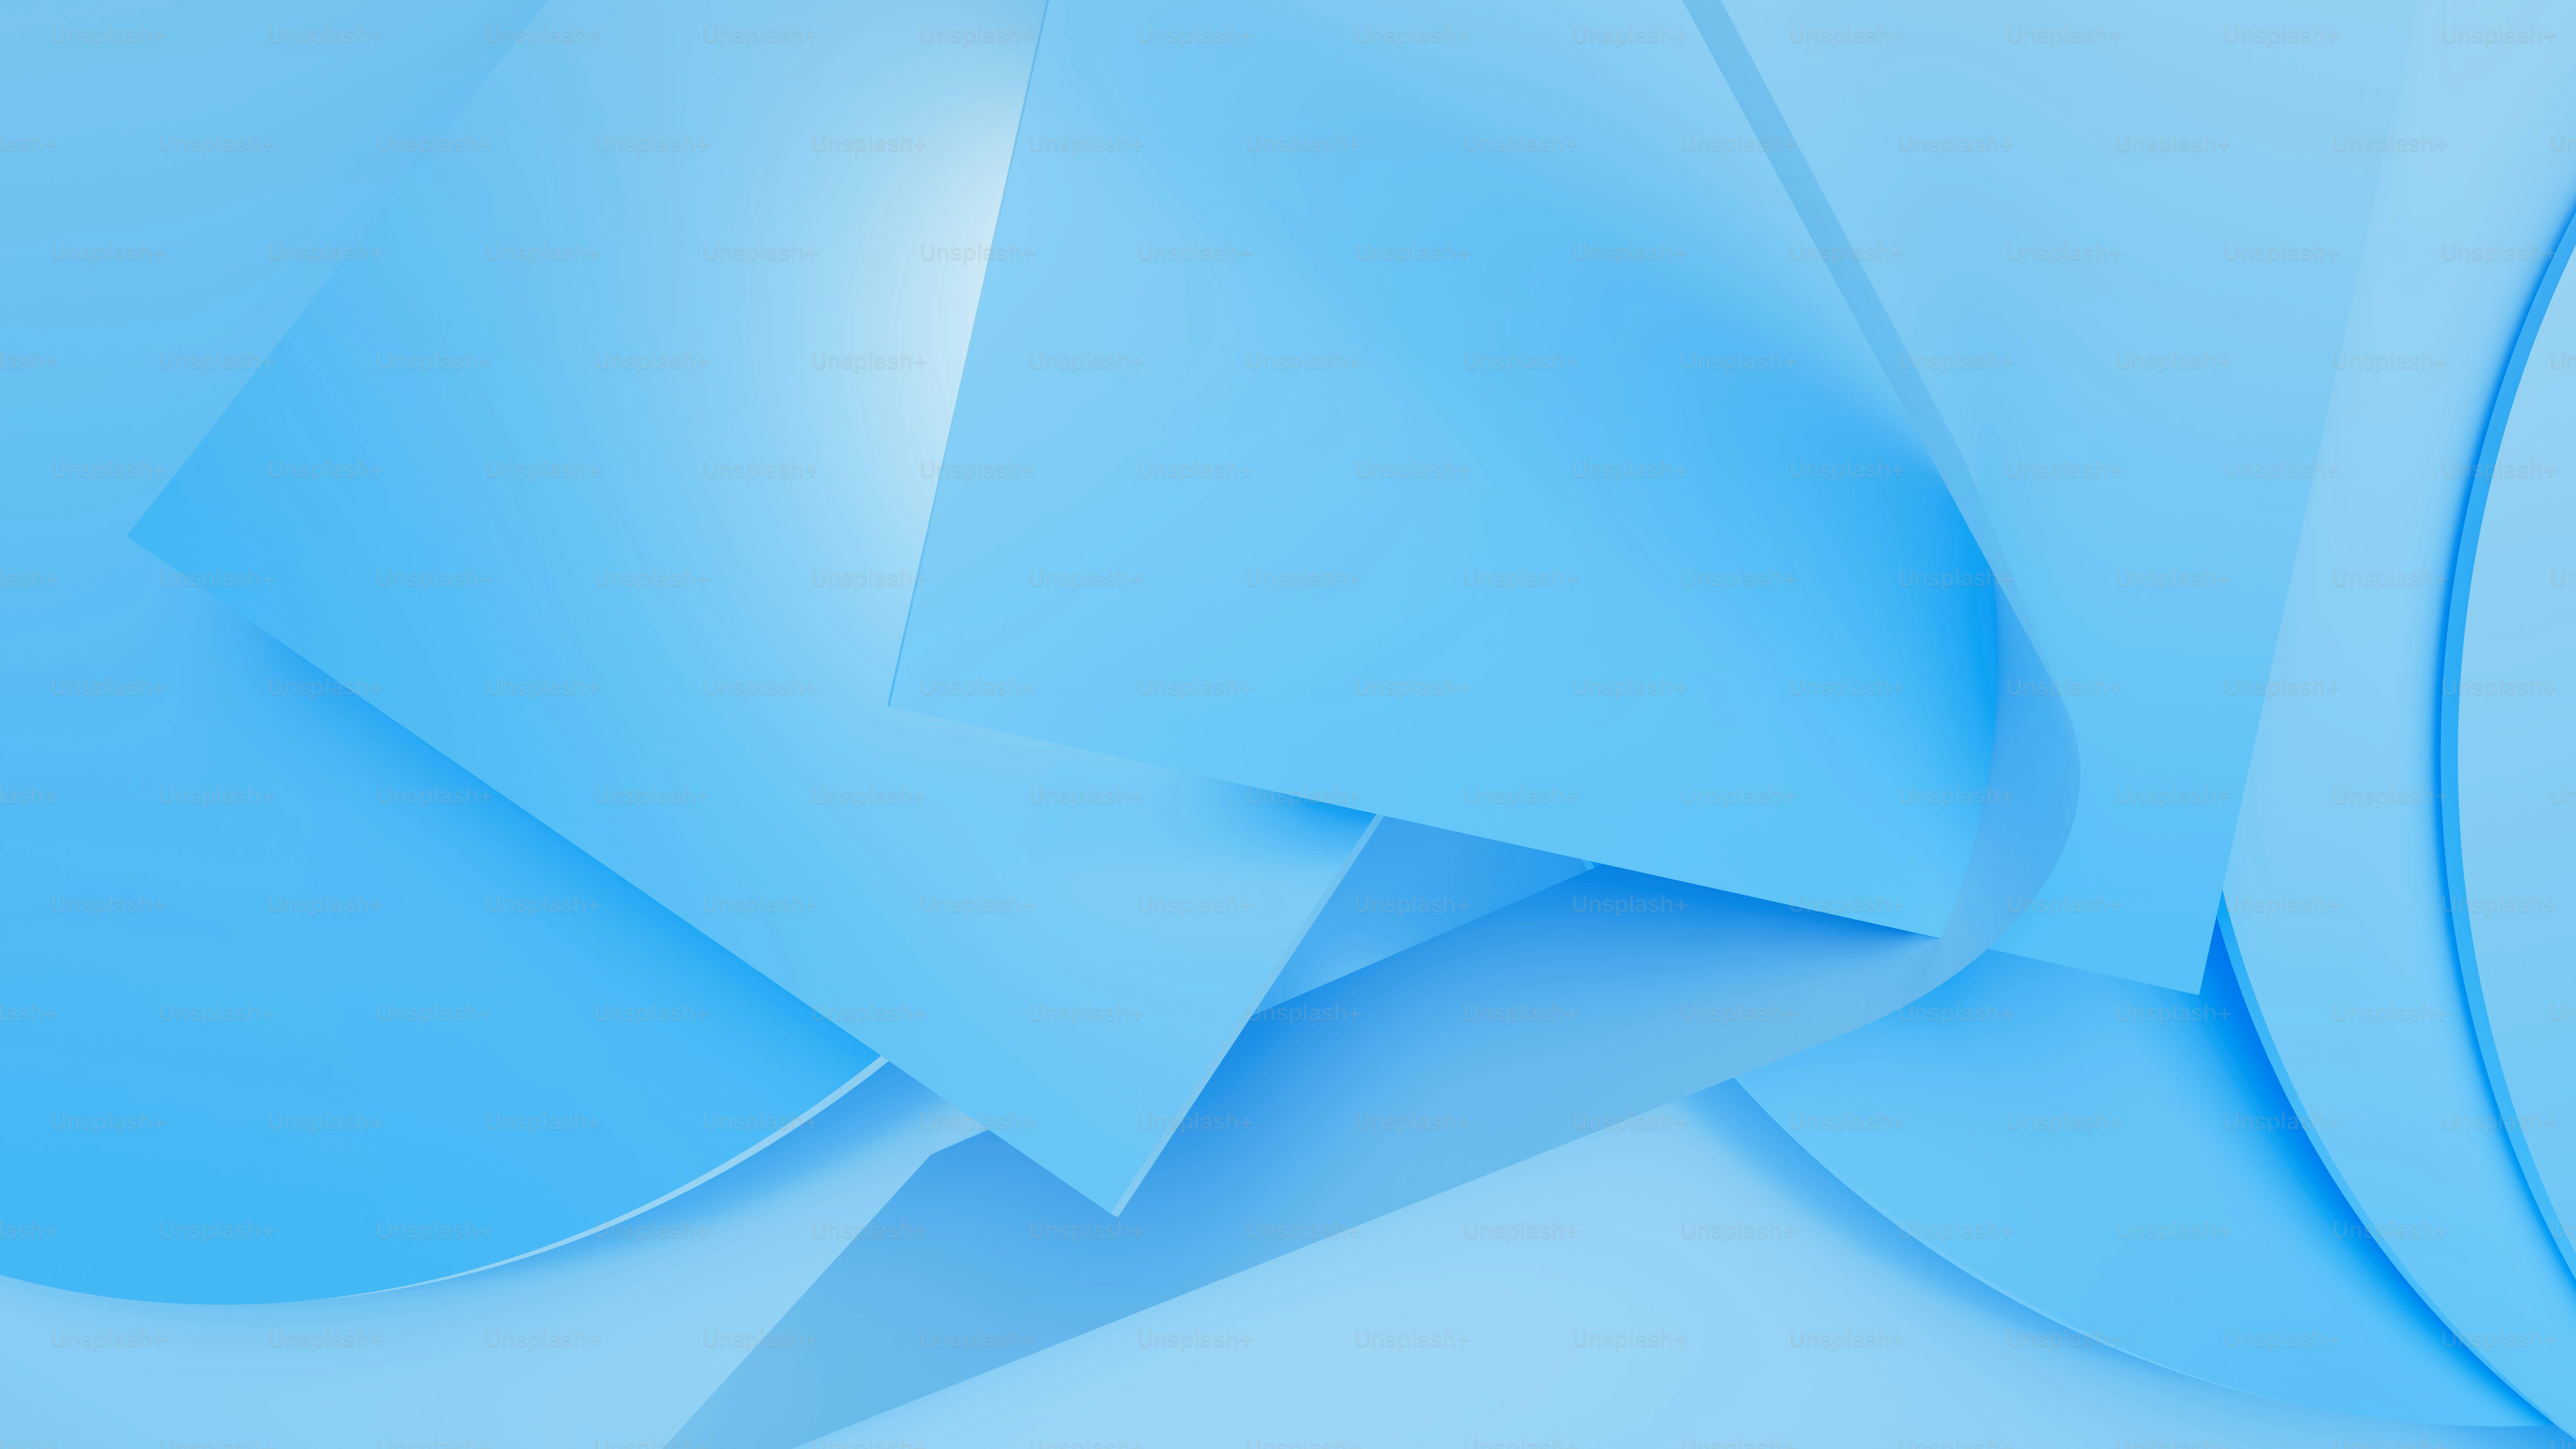 Presentation Background - Abstract Shapes - Blue Combo